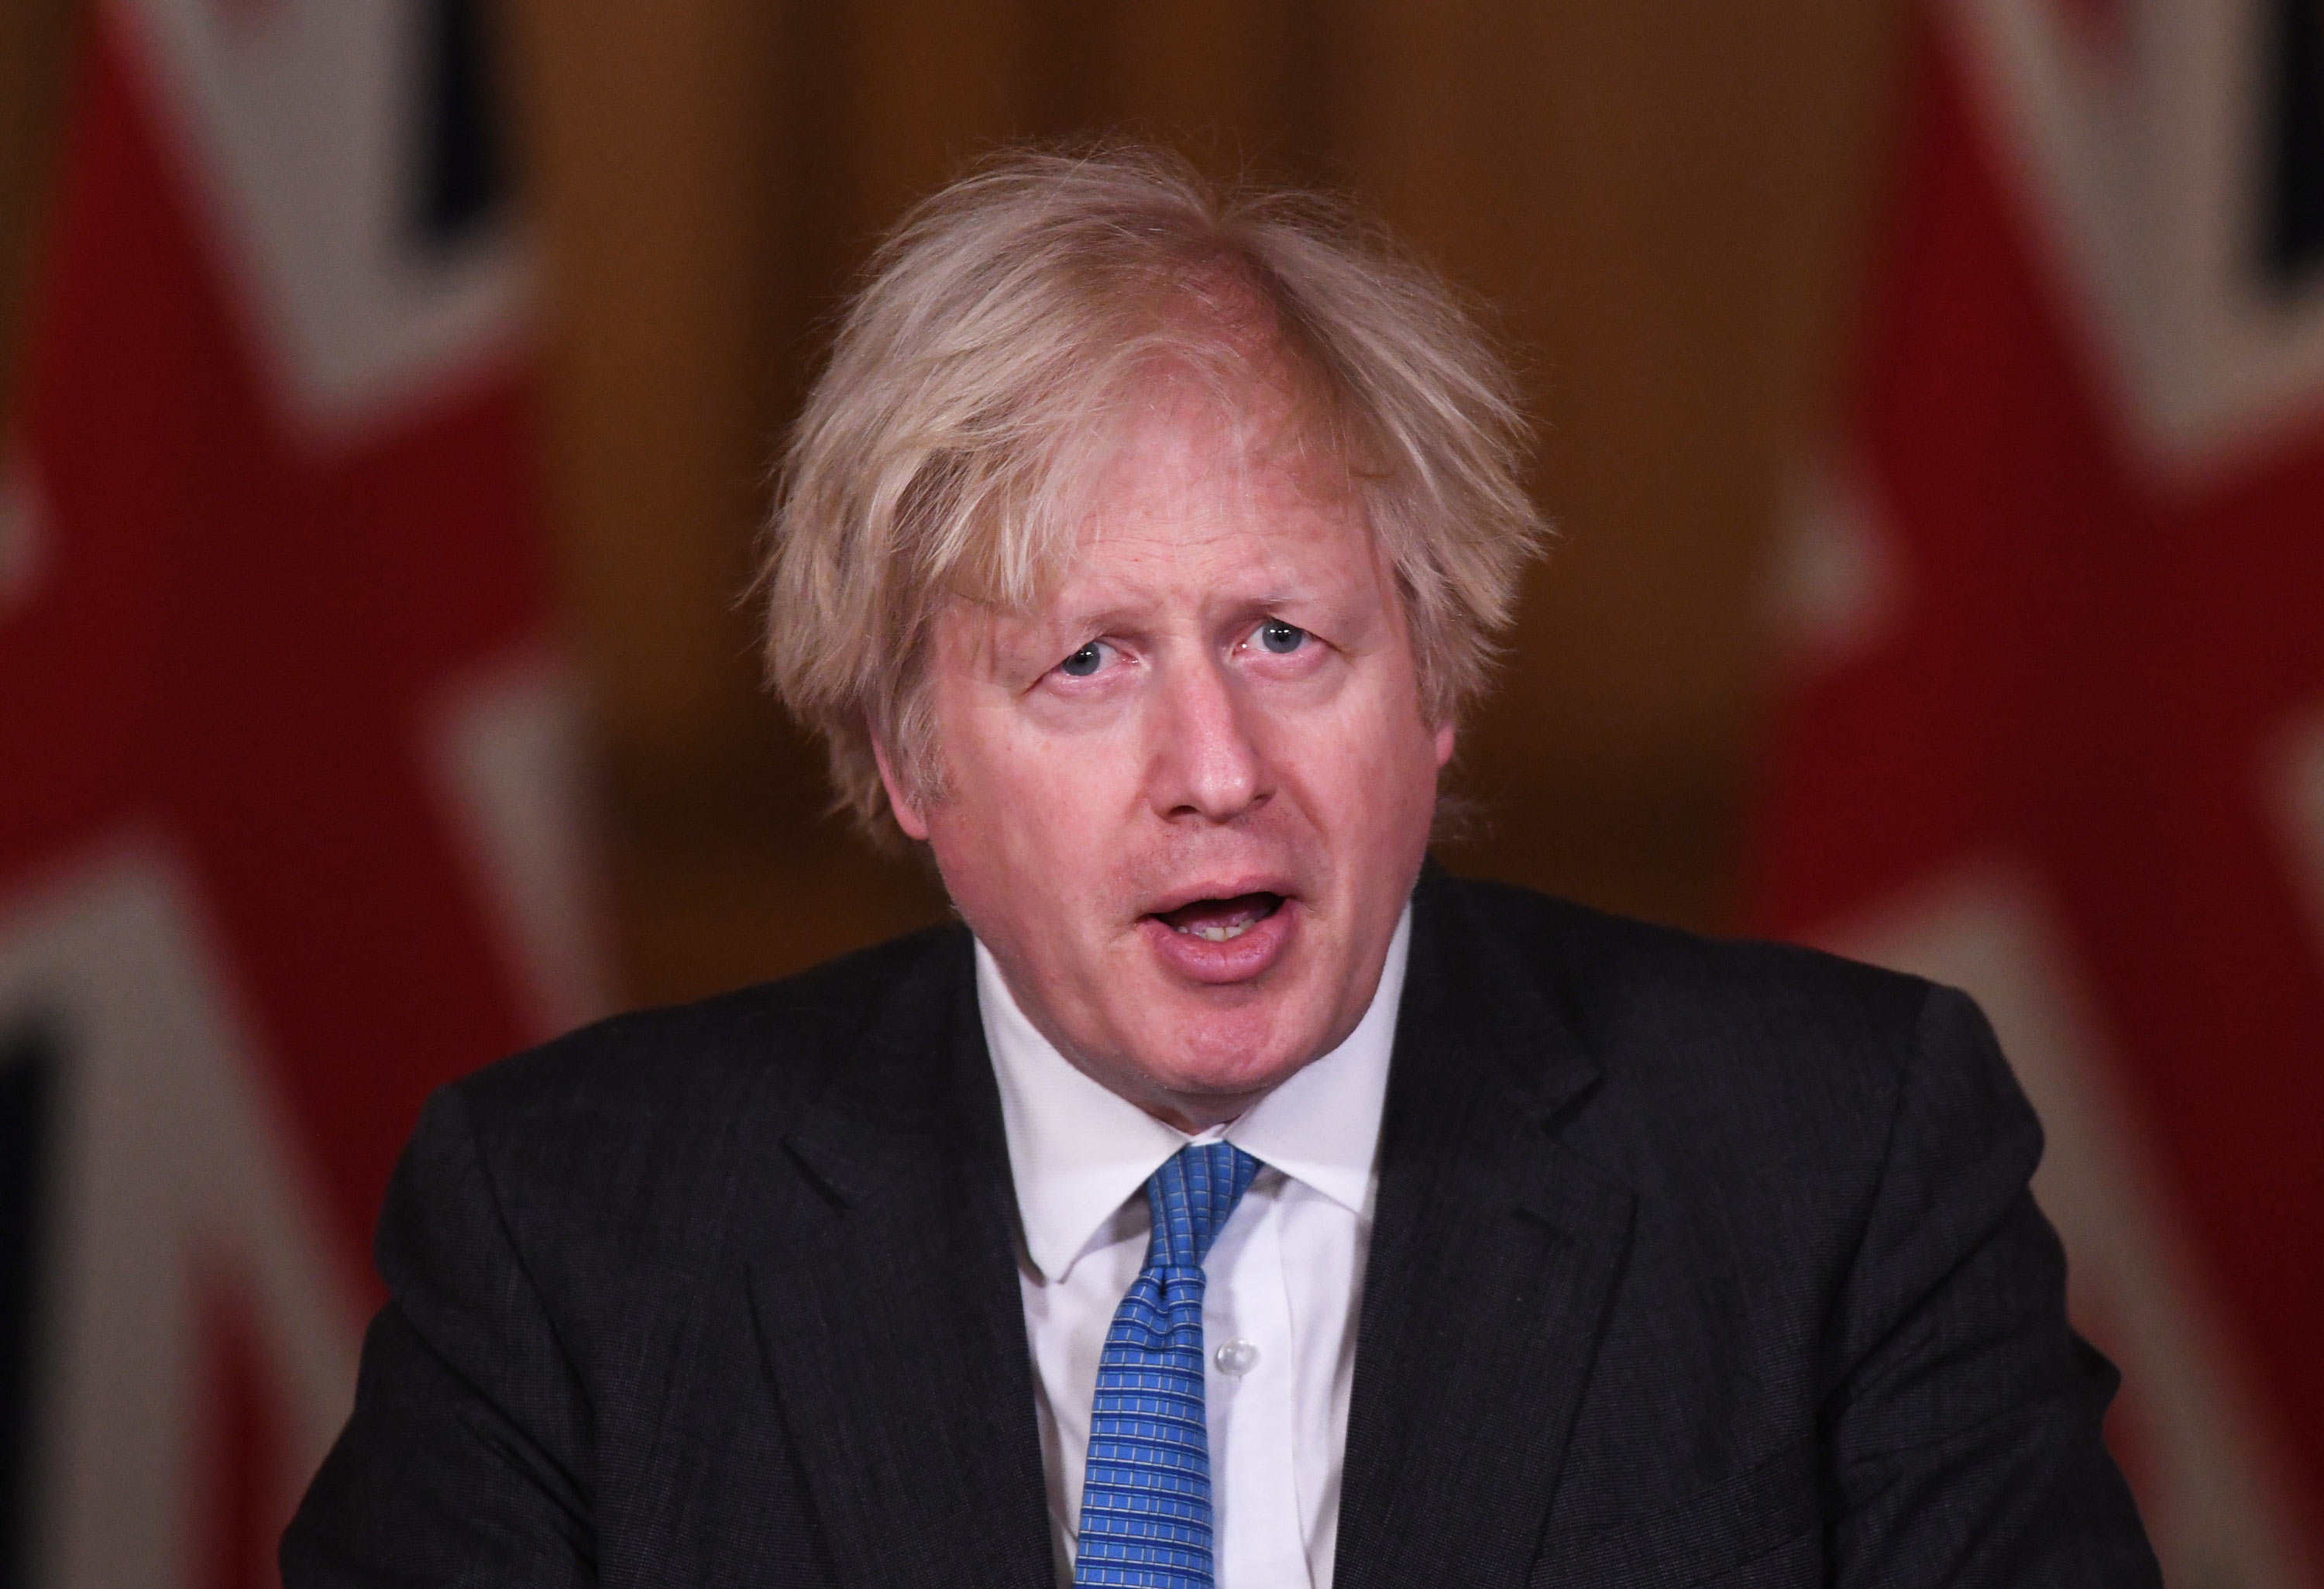 UK Prime Minister Boris Johnson talks during a Covid-19 media briefing in Downing Street on February 15 in London.